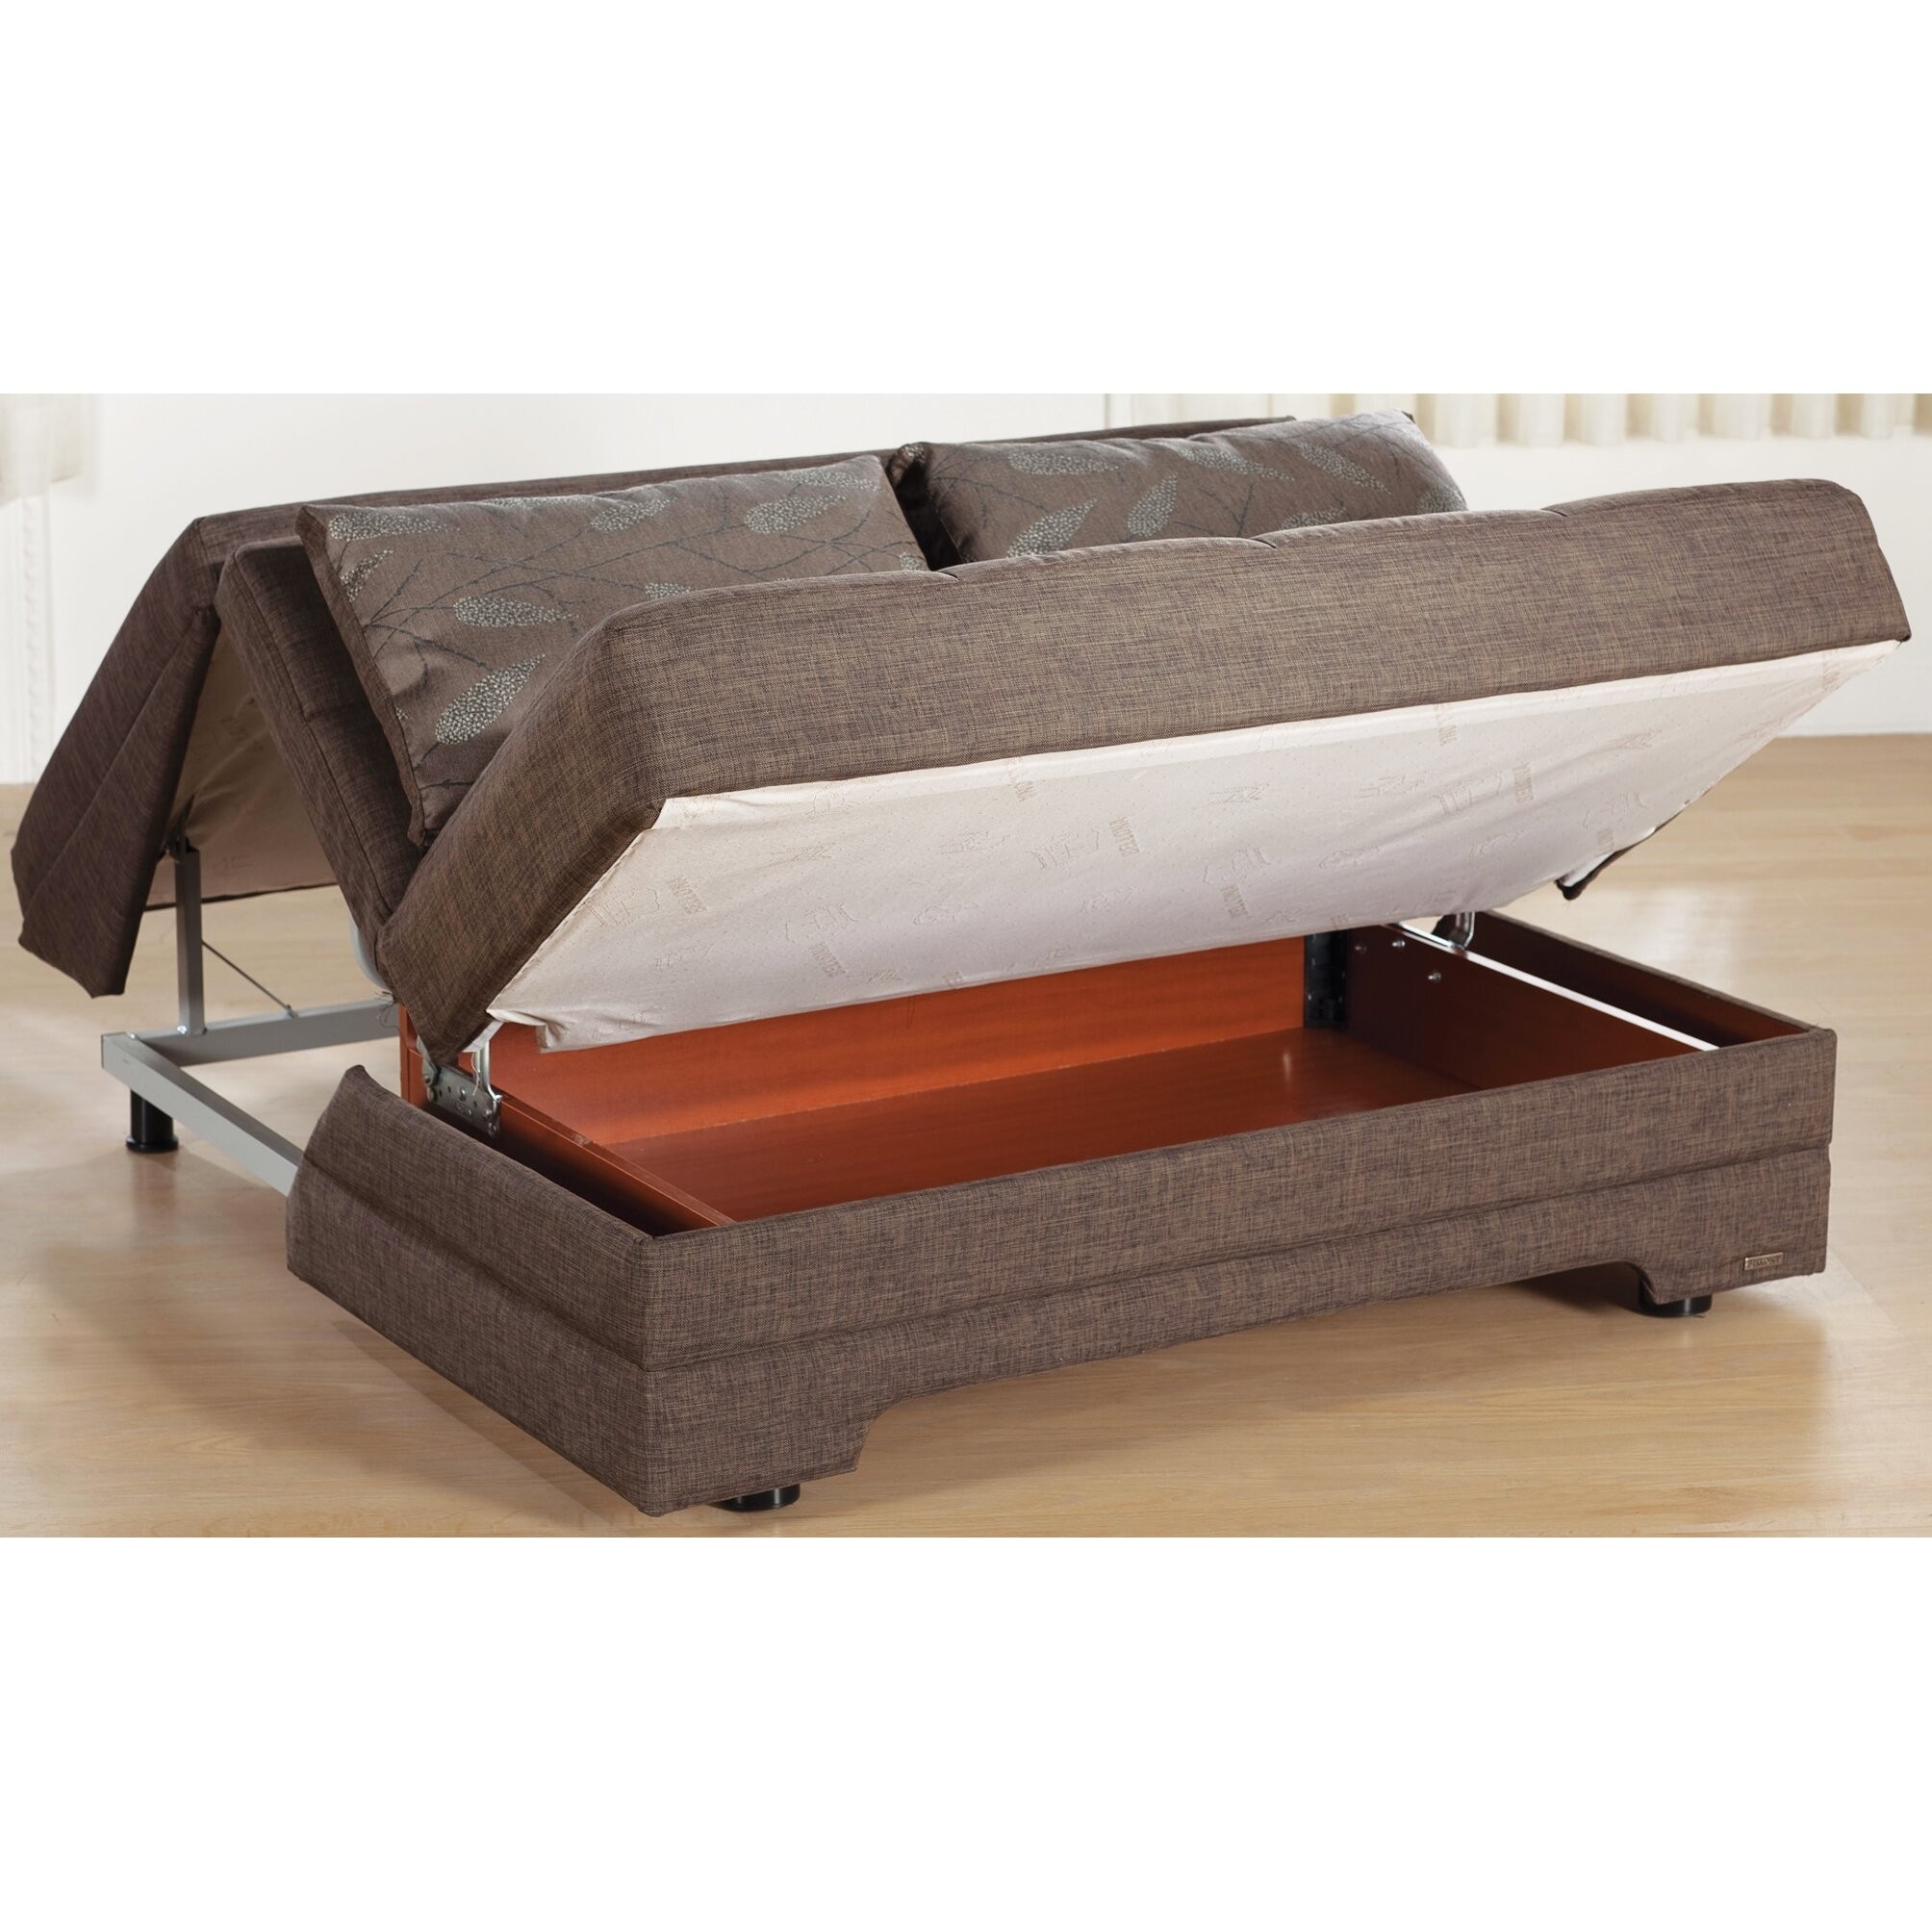 Sofa bed with trundle